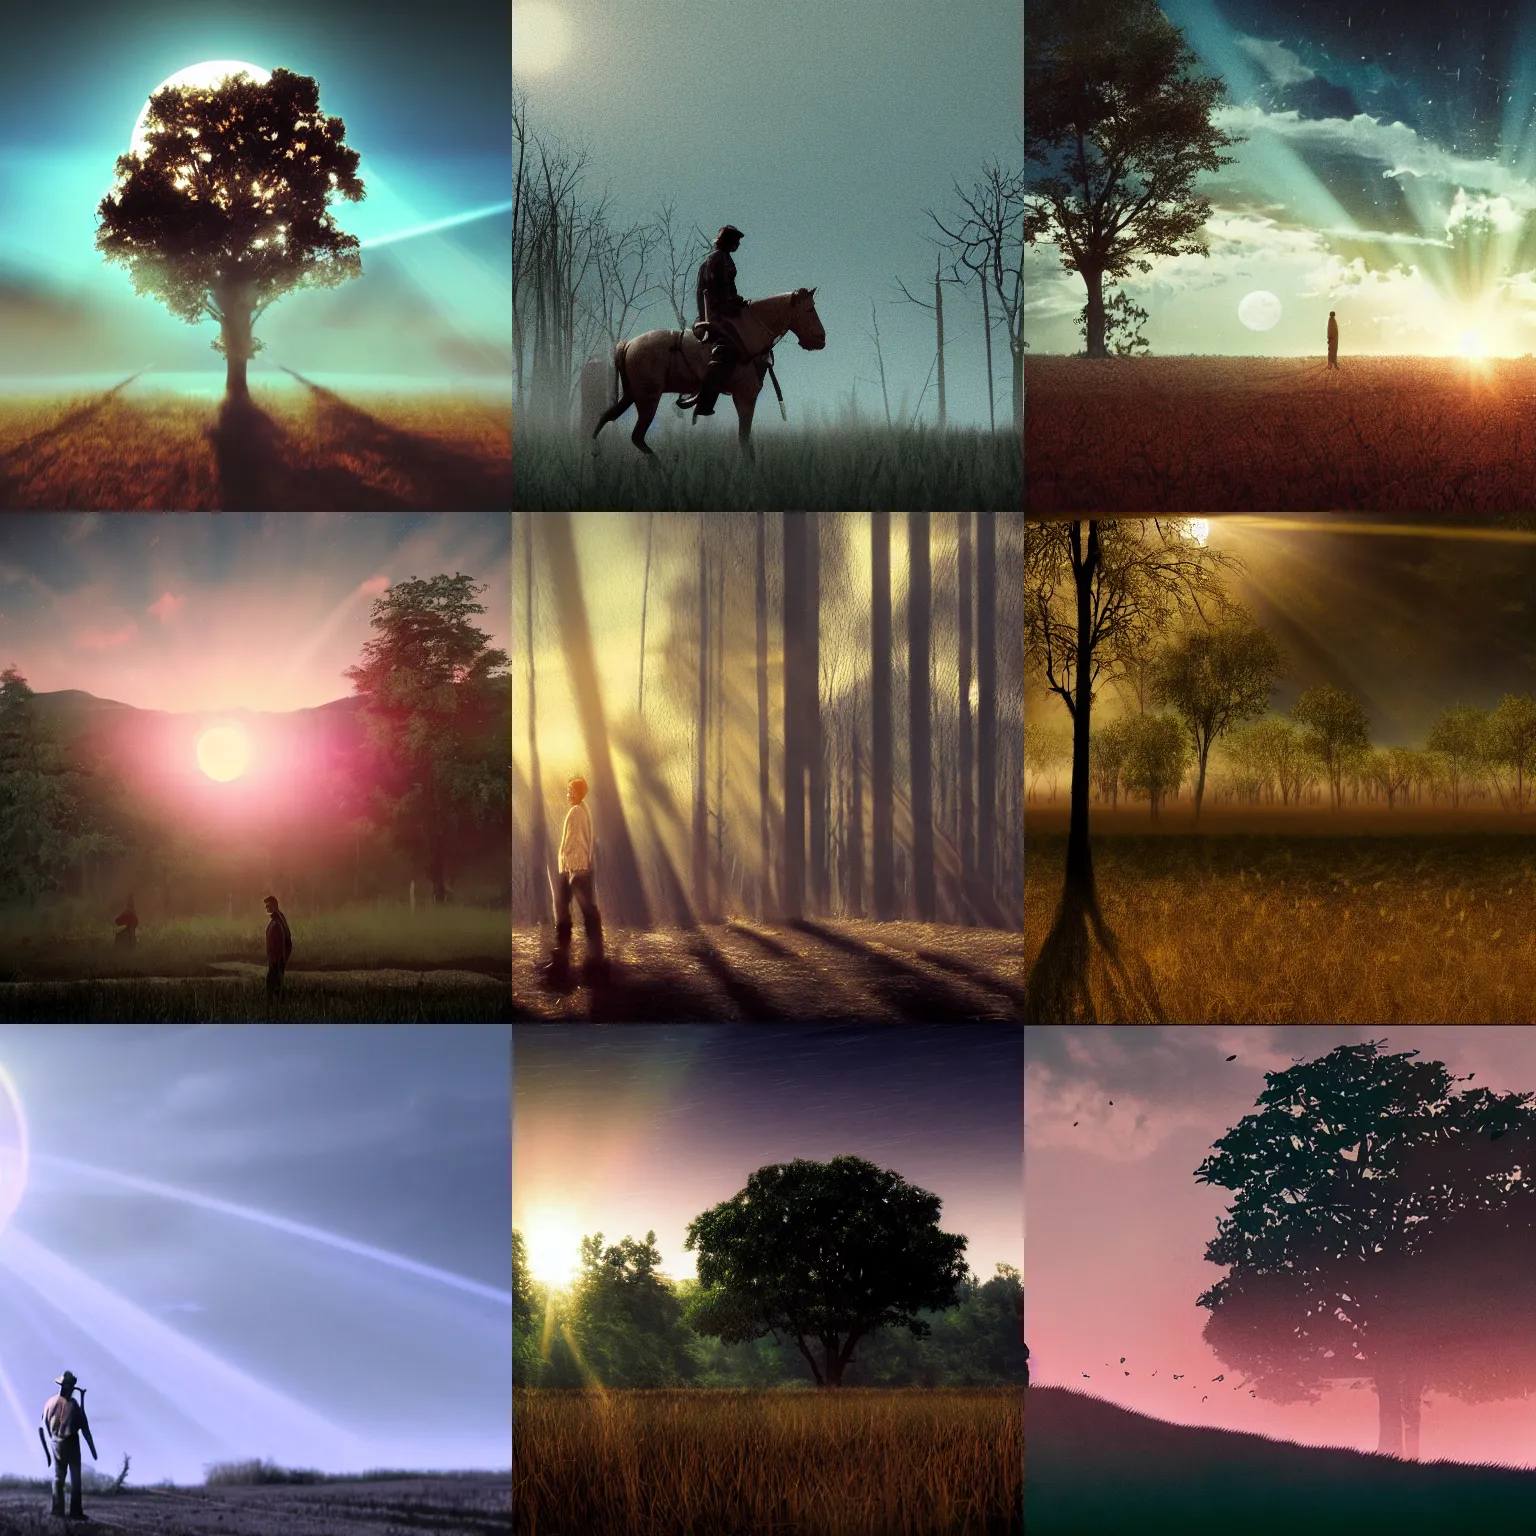 Prompt: cinematic + cinematography + washed out + foreground + background + dark + rim light + back light + harvest moon + dramatic + Spielberg + Coppola + Akira Kurosawa + emulsion + crepuscular rays + lighting + character-art + concept + art + foundry VFX + katana + Octane render + photorealistic + natural light + moonlight + outdoors + wooded forest + mycelium growth + tree + depth + weathered + rain + soft + subtle + subdued + film + cliffs + bleached + warm tones + 35mm + blur + depth + crowd + villagers + night lighting + desolate + lumberjack + town+ village + black horses + stallion + aerial + backside + campfire + roots + creature + distant + wet + fog + atmospheric + puddles + high-detail + 8K + specularity + shiny + dripping + soaked + muddy + puddles + drenched + halo + mirror + reflections + lifted colors + lens distortion + scratched film + oil paintings + environmental + hdr